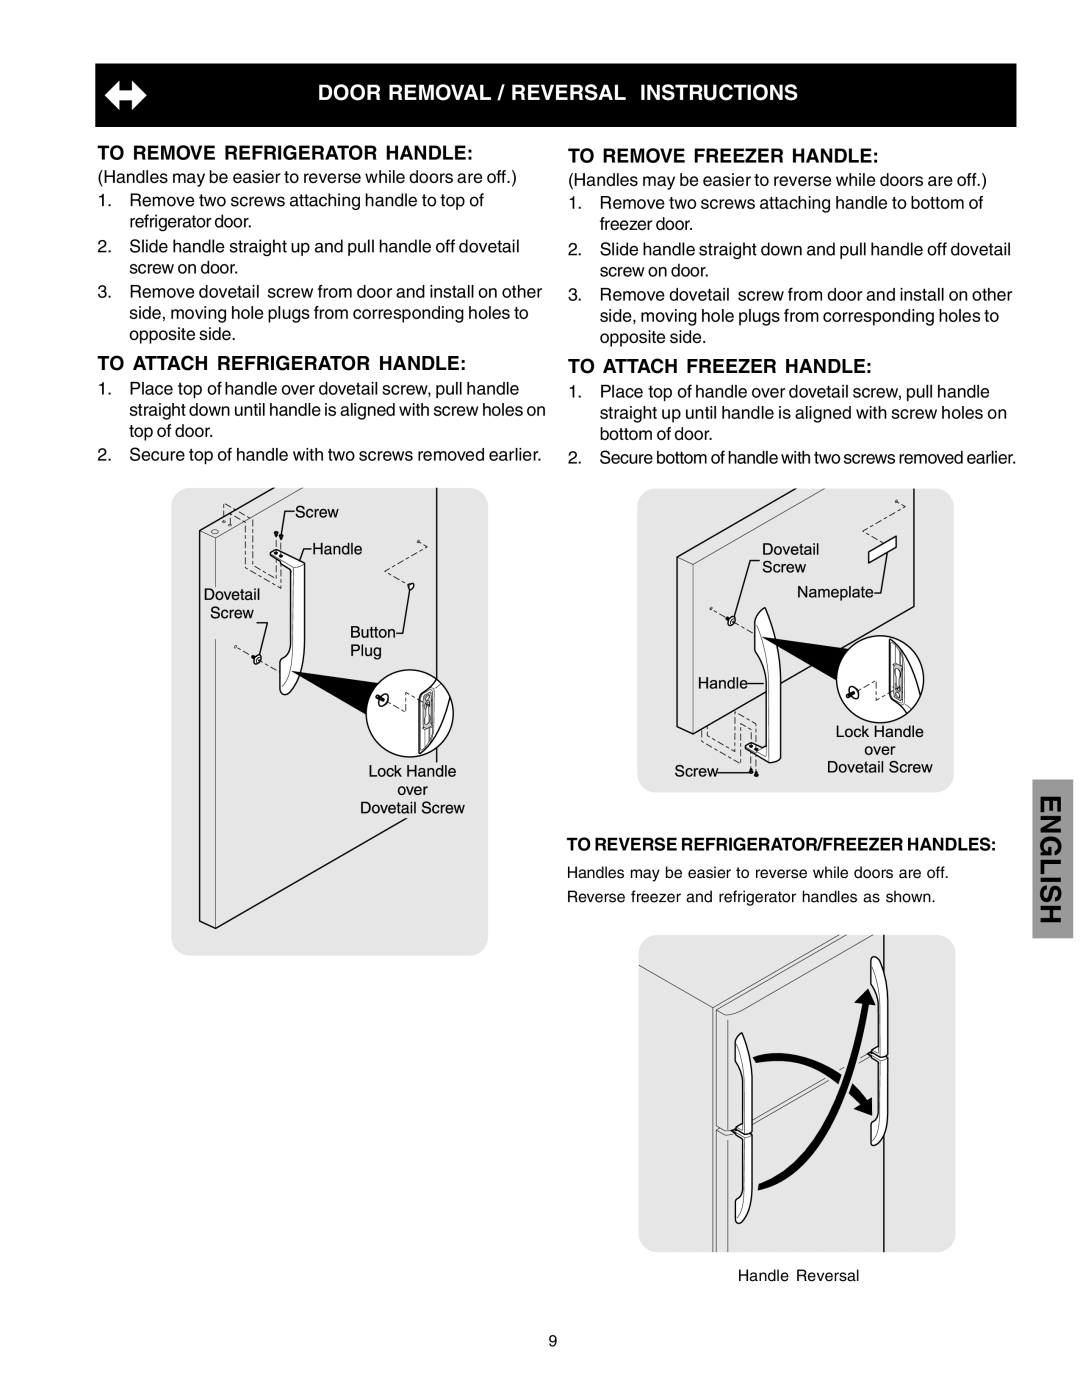 Kenmore 241815202 English, Door Removal / Reversal Instructions, To Remove Refrigerator Handle, To Remove Freezer Handle 